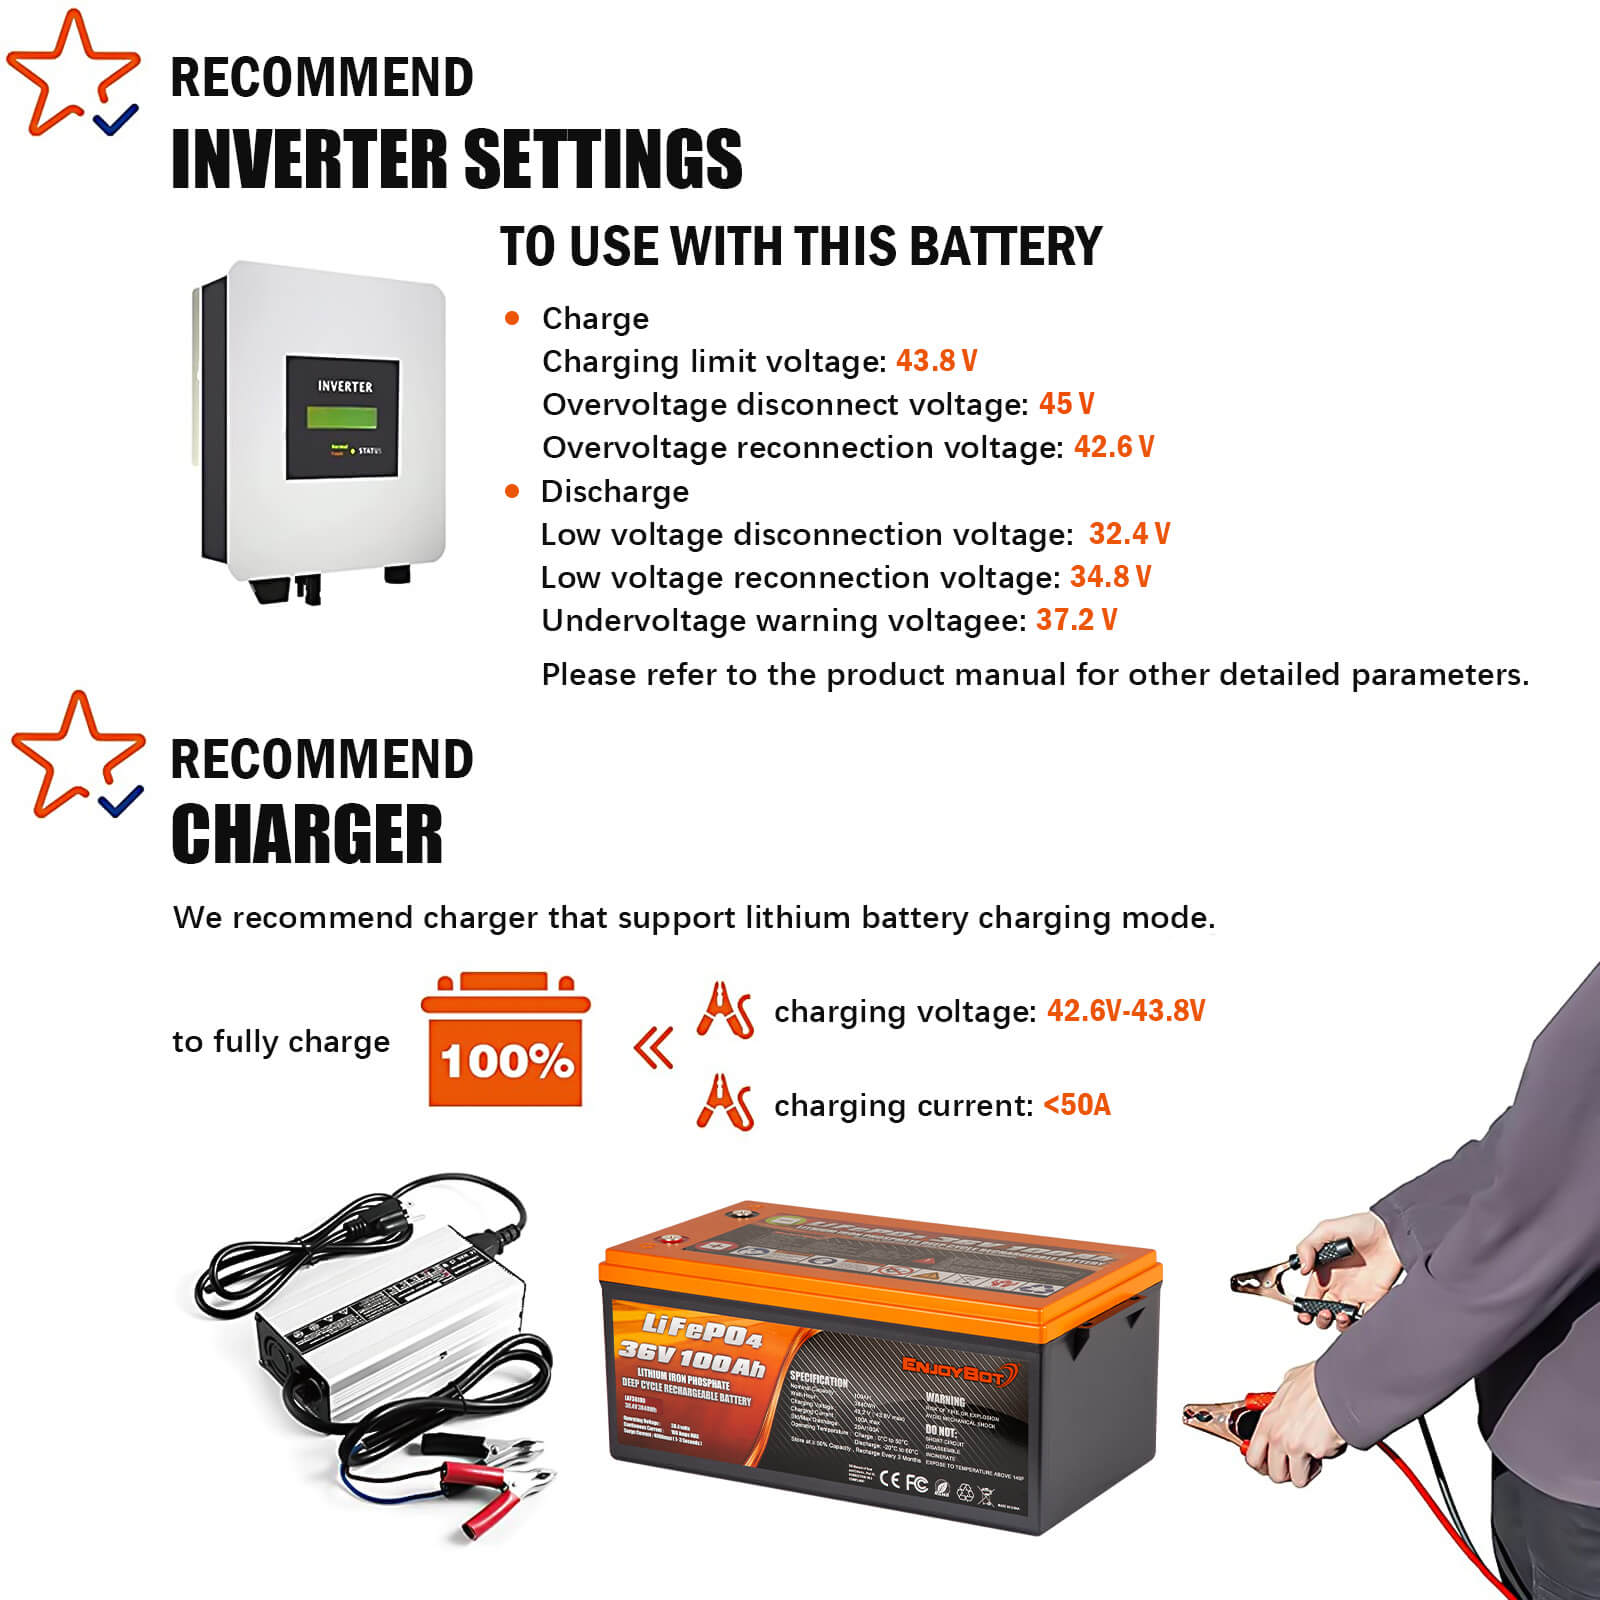 ENJOYBOT Bluetooth 36V 100AH 3840Wh Smart Lithium Battery + Dedicated 13A battery charger